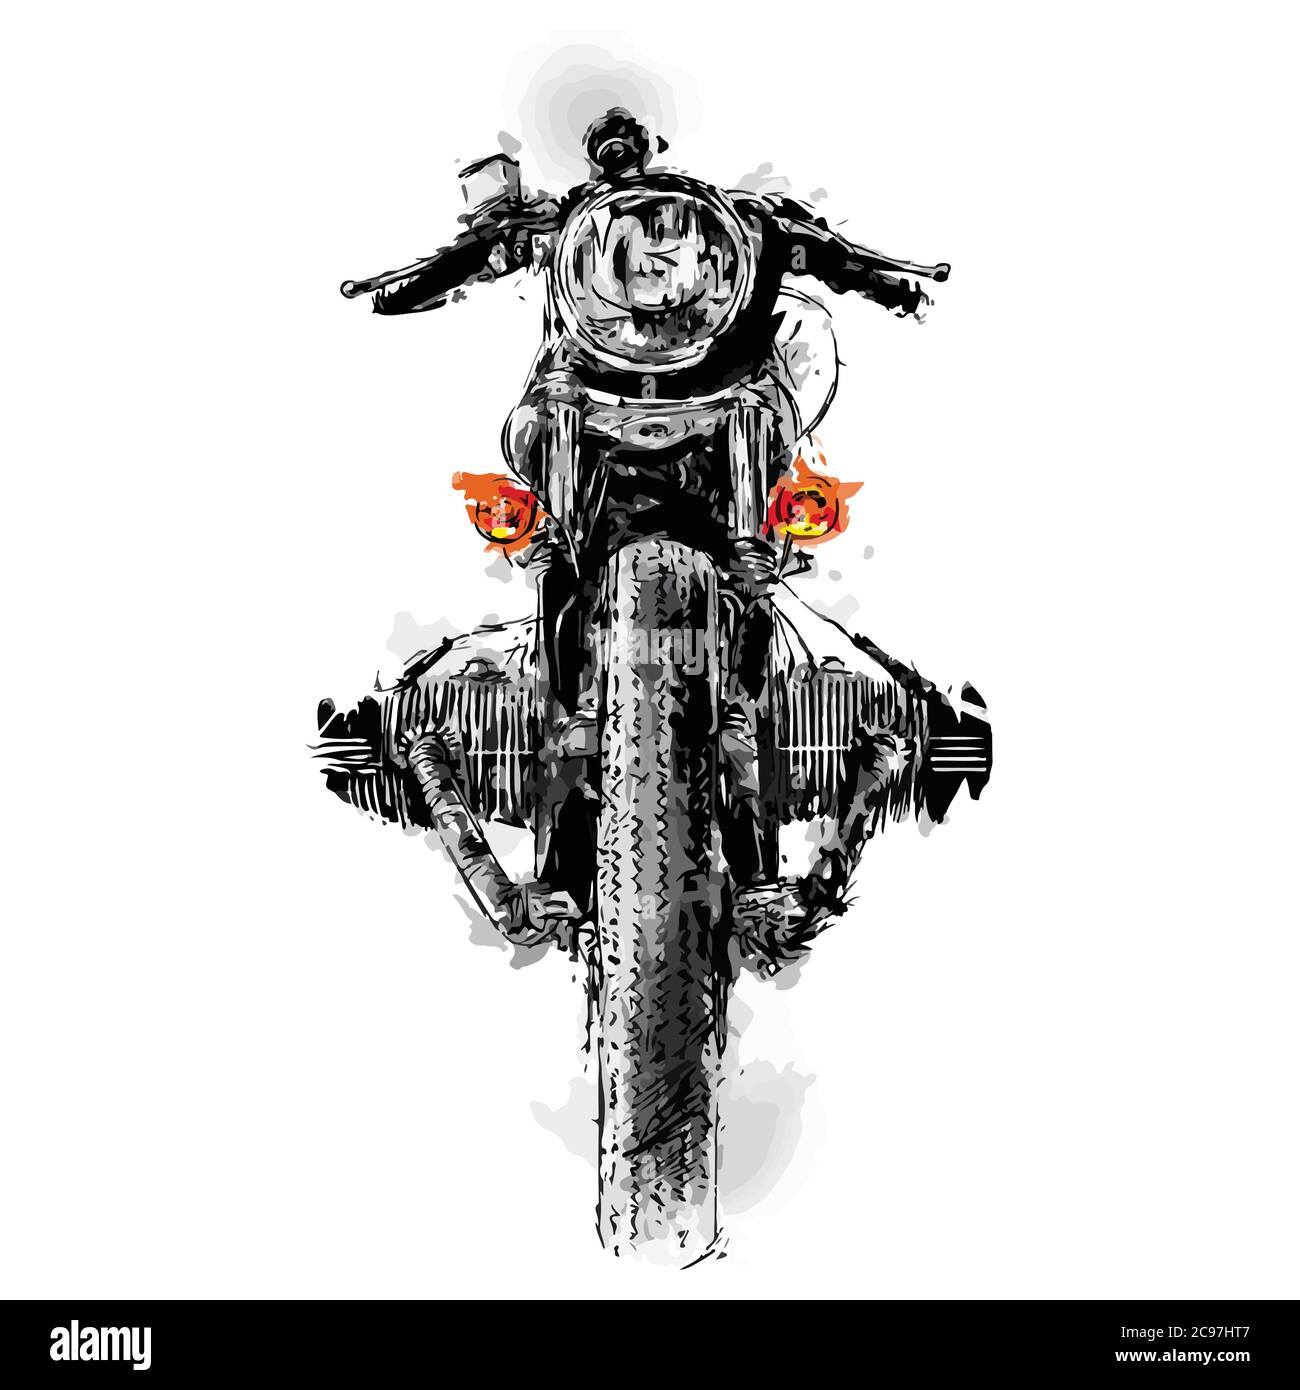 Drawing a Royal Enfield bike | Simple and easy to follow - YouTube